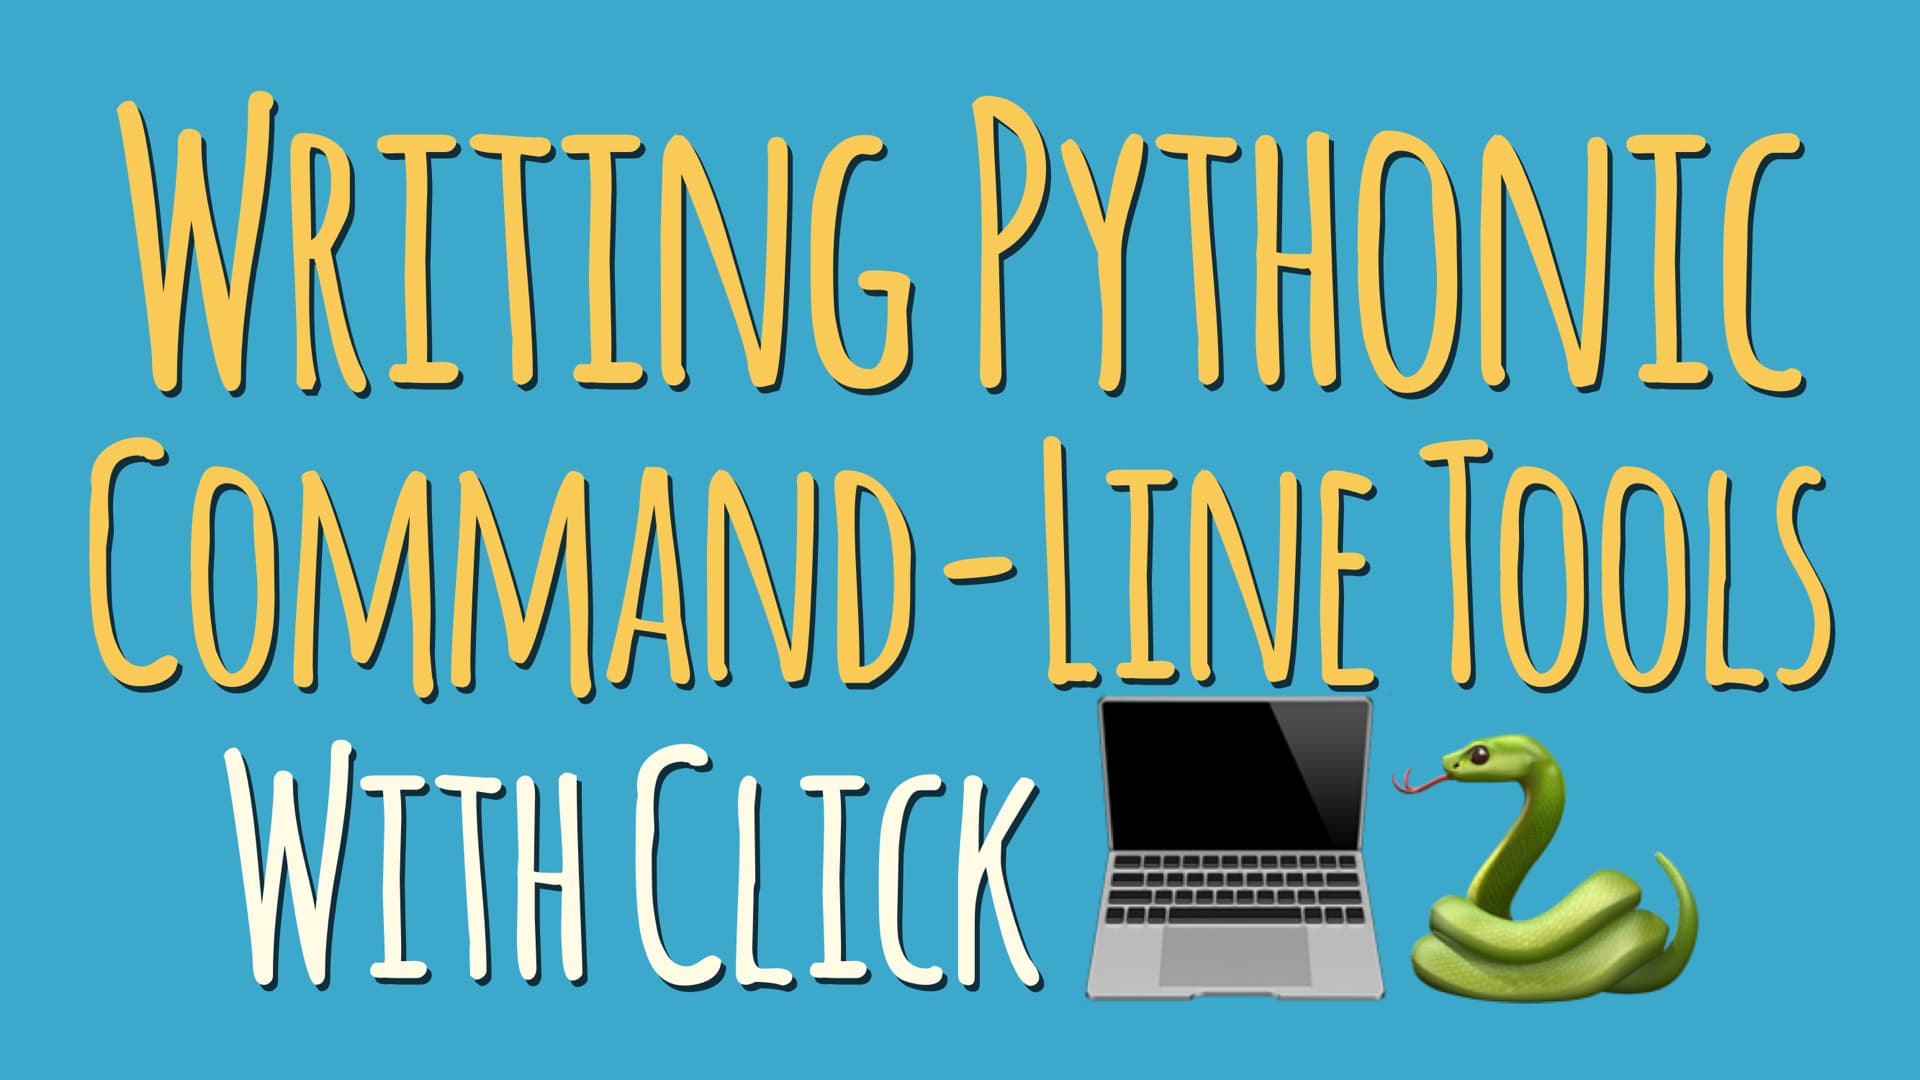 Writing Pythonic Command-Line Tools with Click